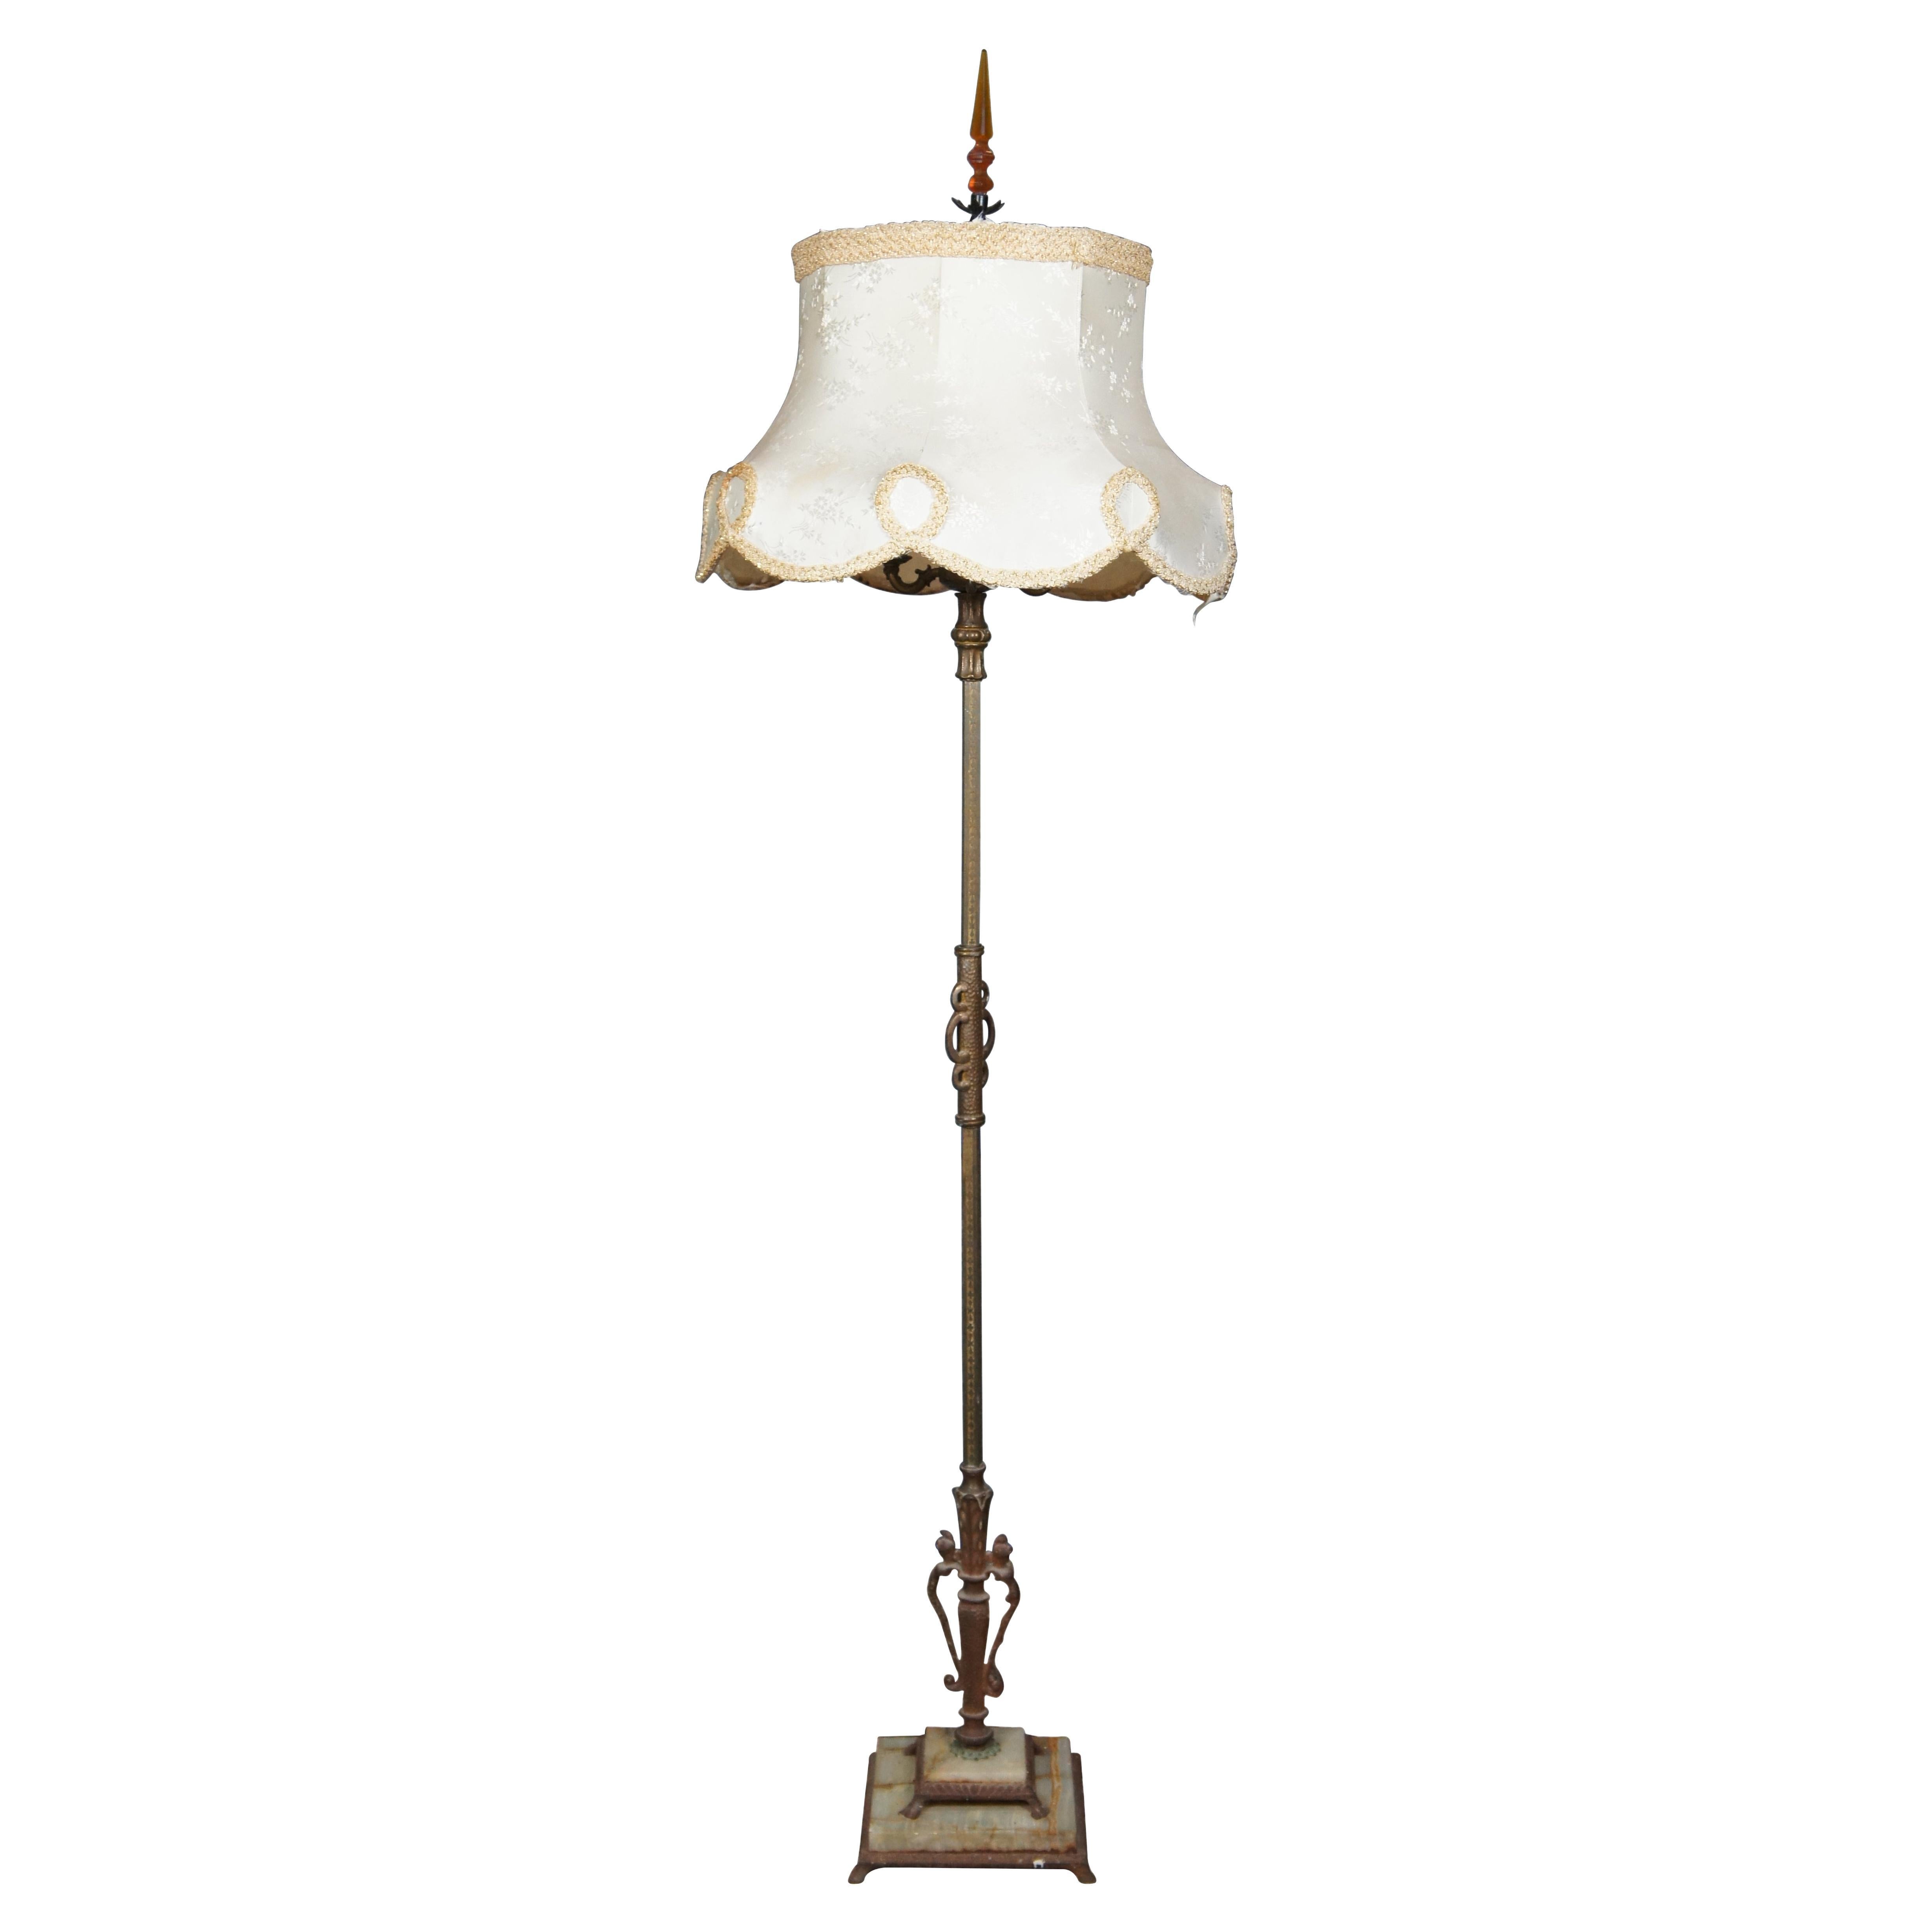 Antique Brass & Marble 3 Arm Candelabra Torchiere Floor Lamp w Shade 69" For Sale